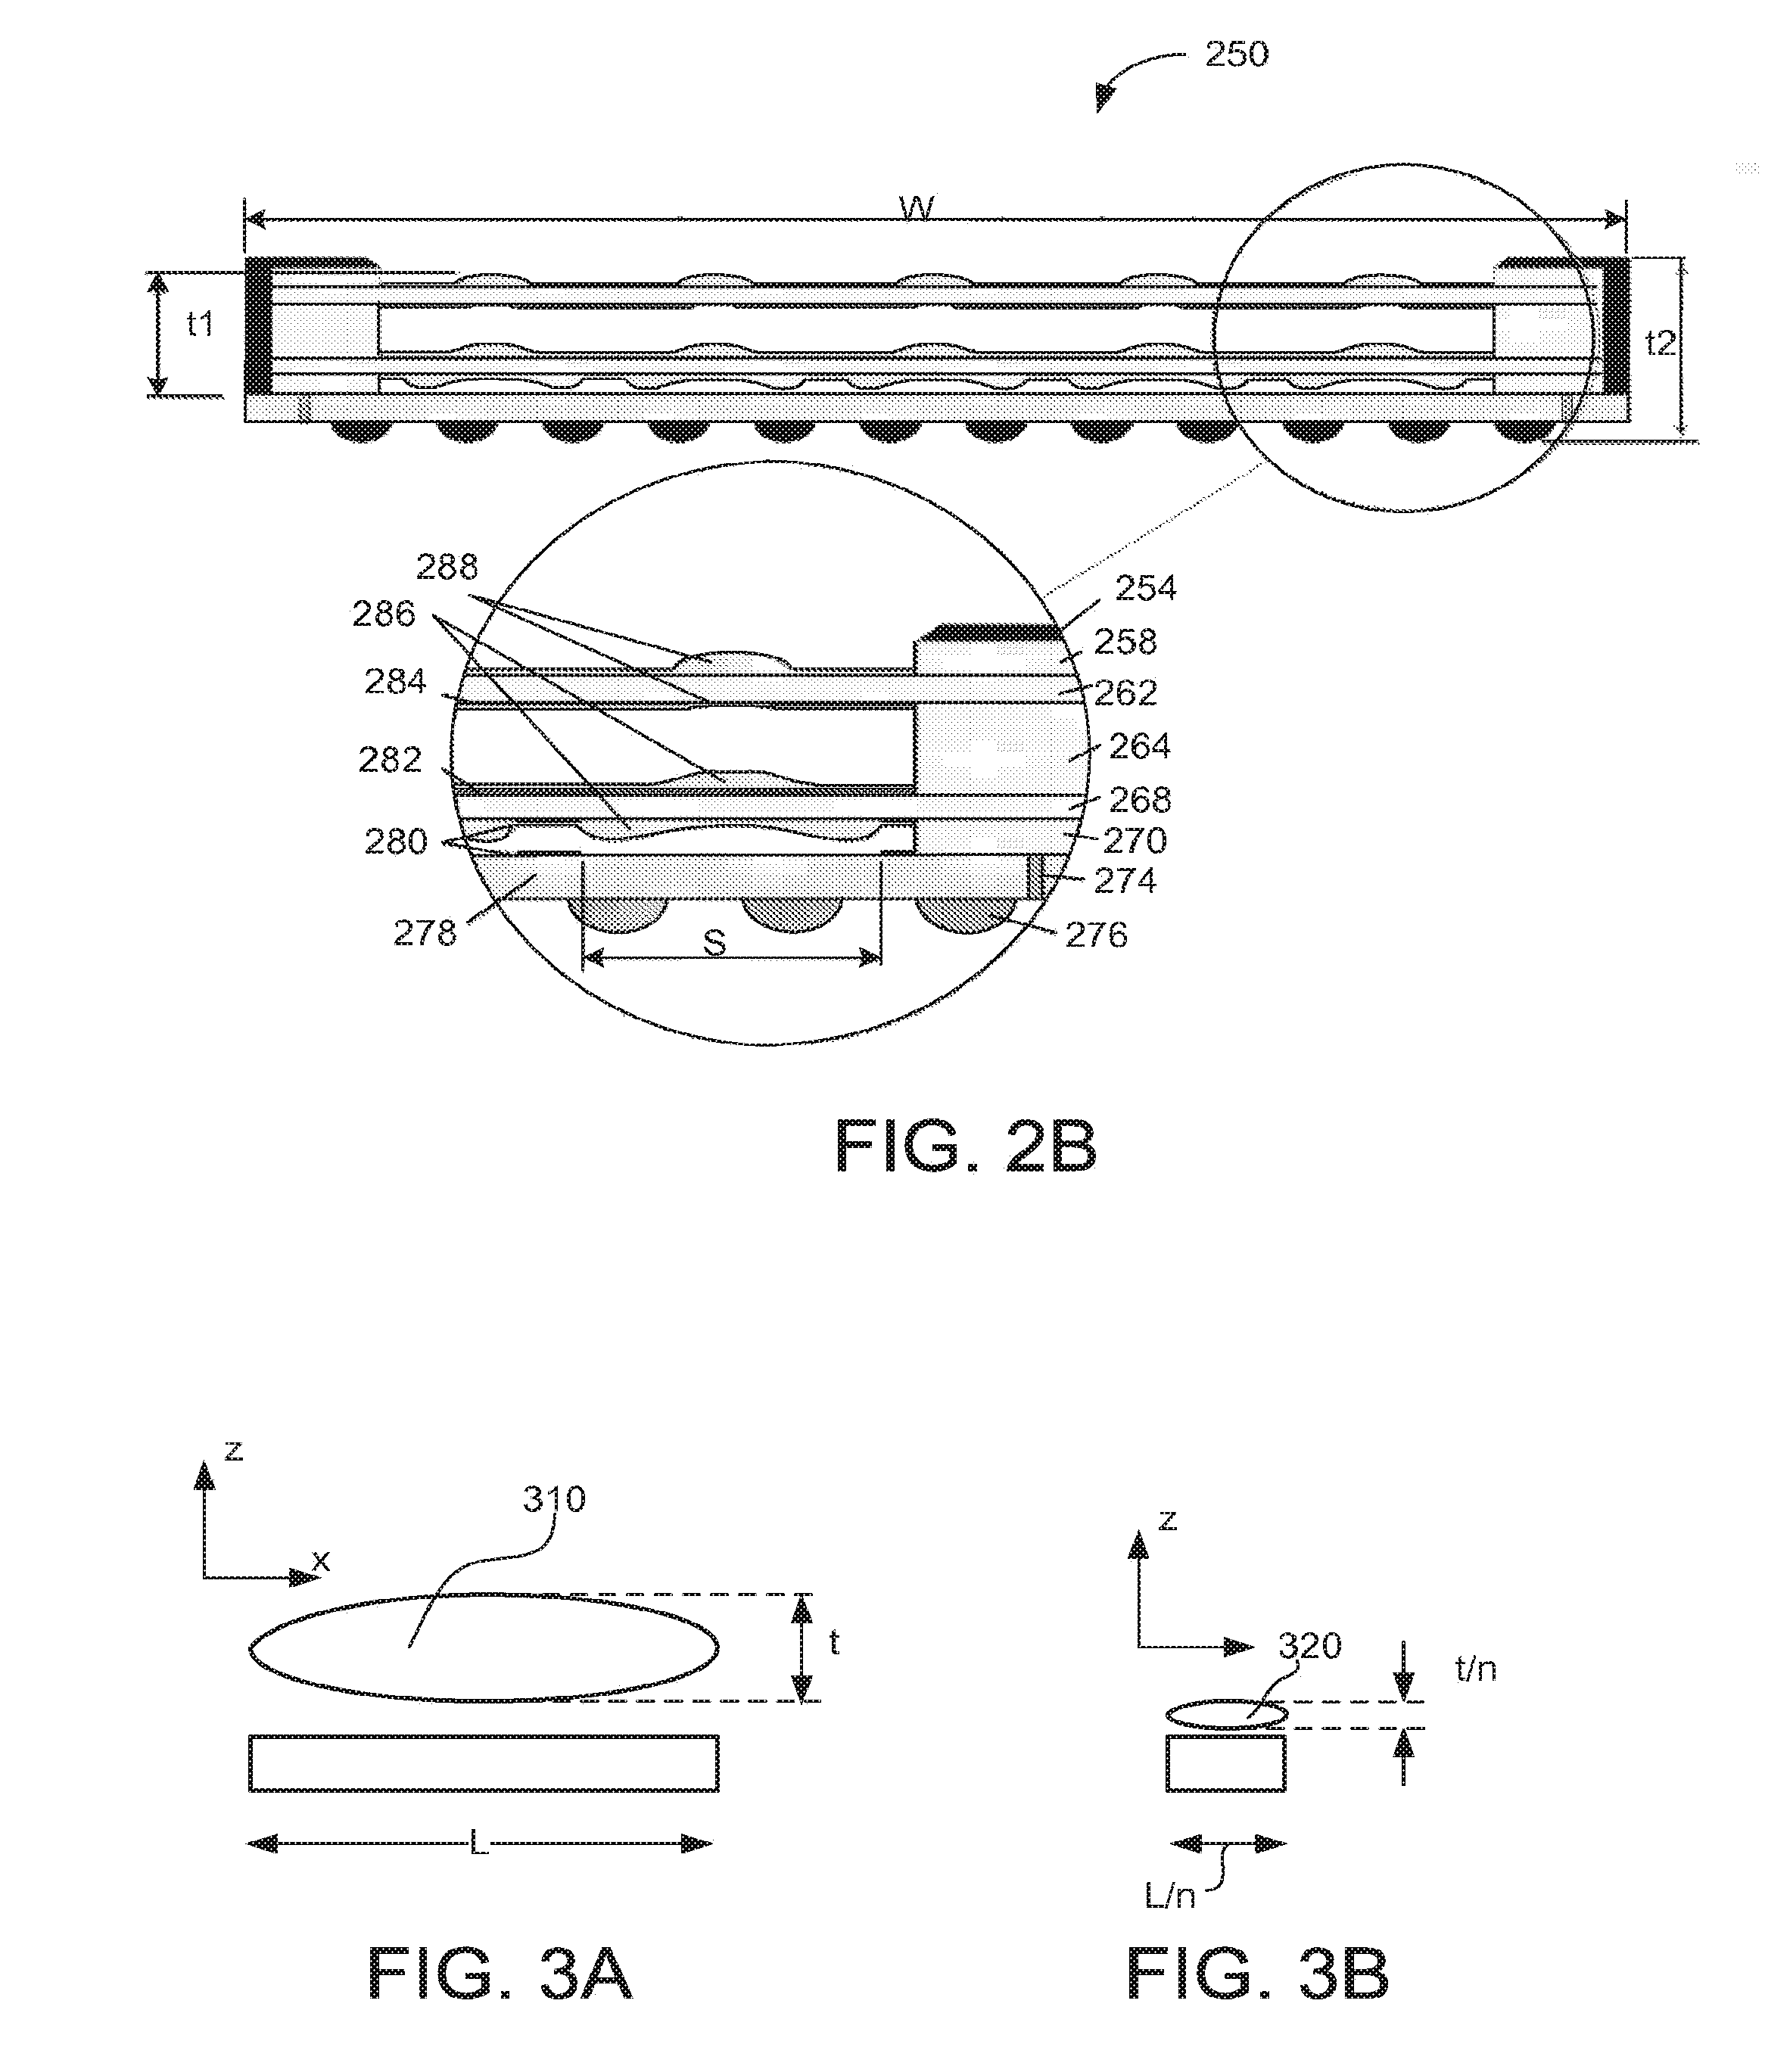 Systems and methods for generating depth maps using a camera arrays incorporating monochrome and color cameras